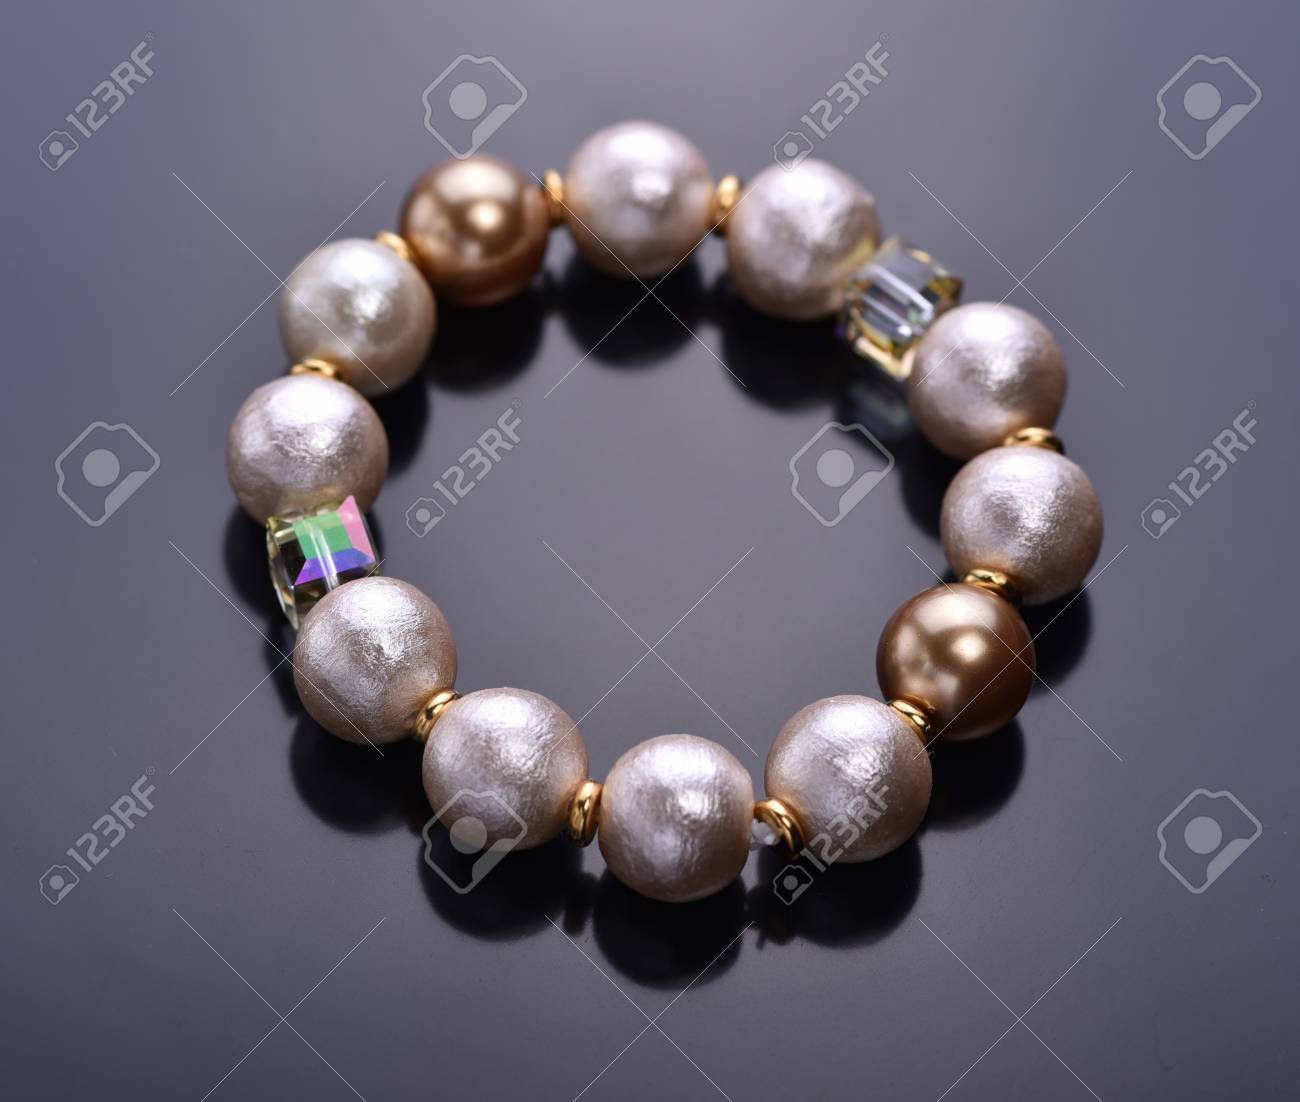 Pearl Bracelet With Crystals On A Dark Background Beadwork